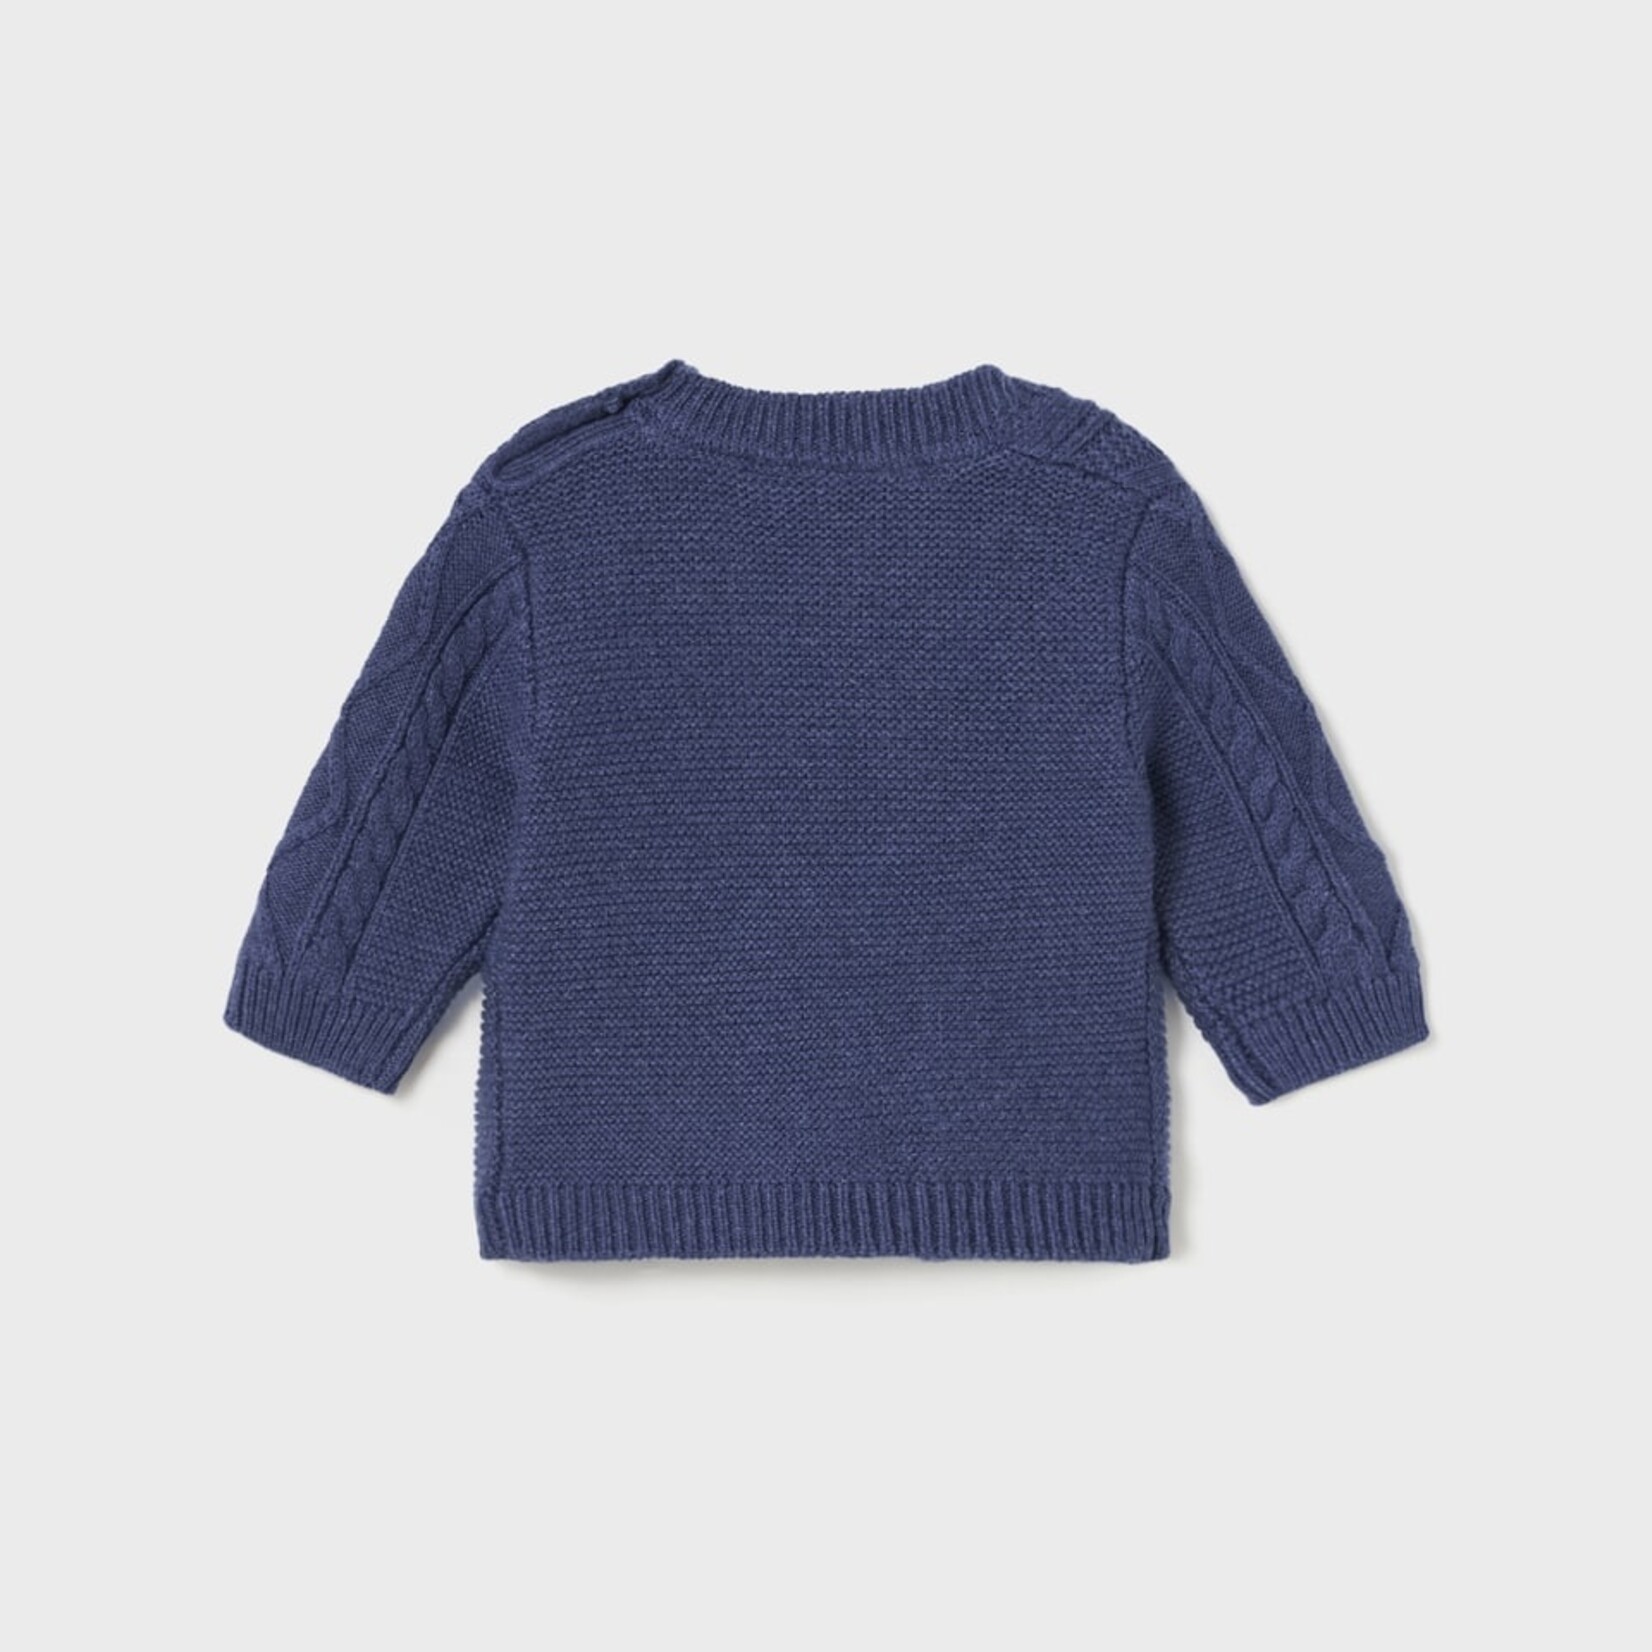 Mayoral Mayoral Braided Sweater Eclipse Blue